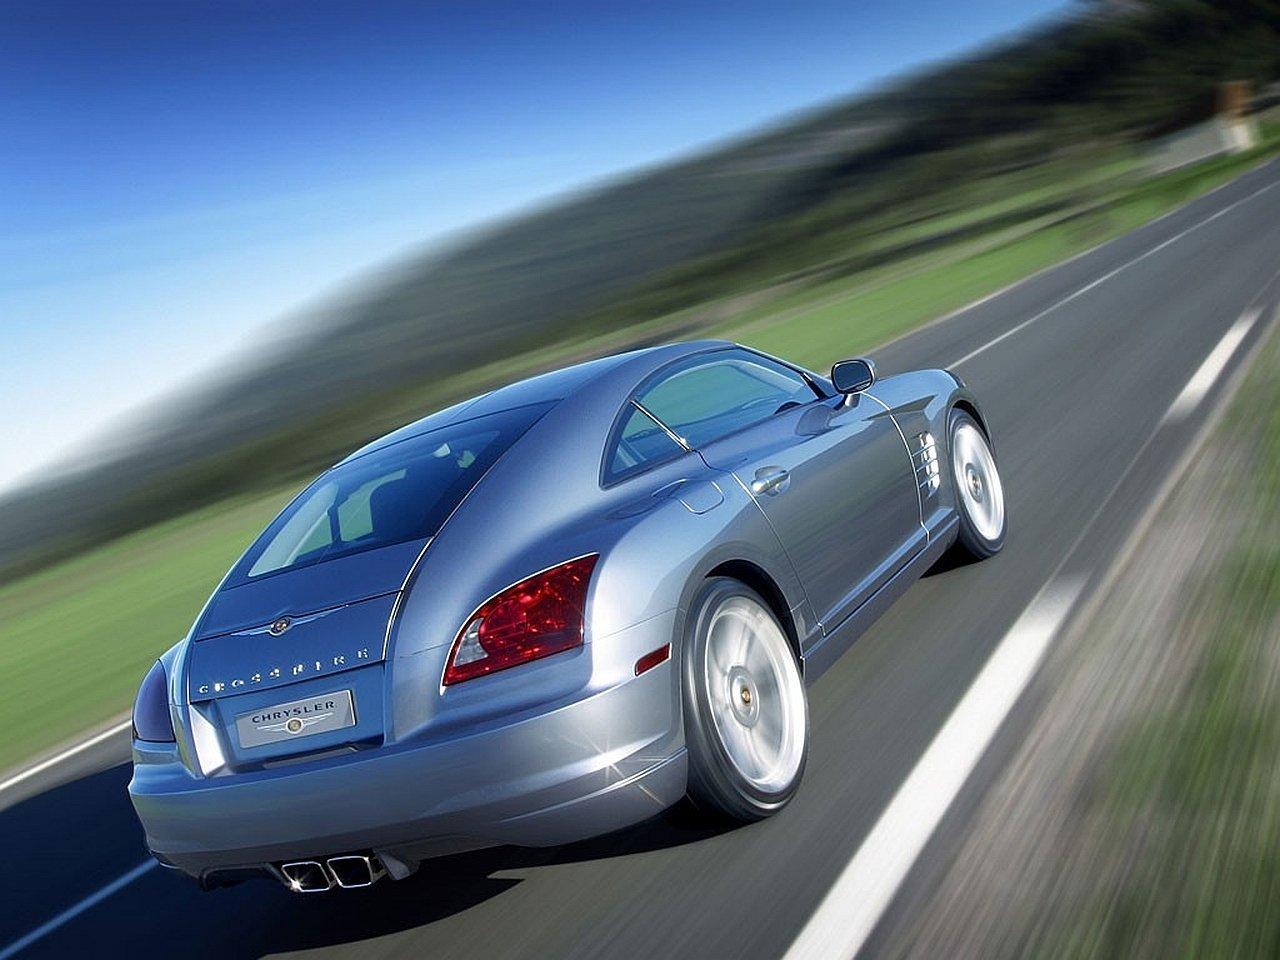 Chrysler Crossfire Wallpaper and Background Imagex960